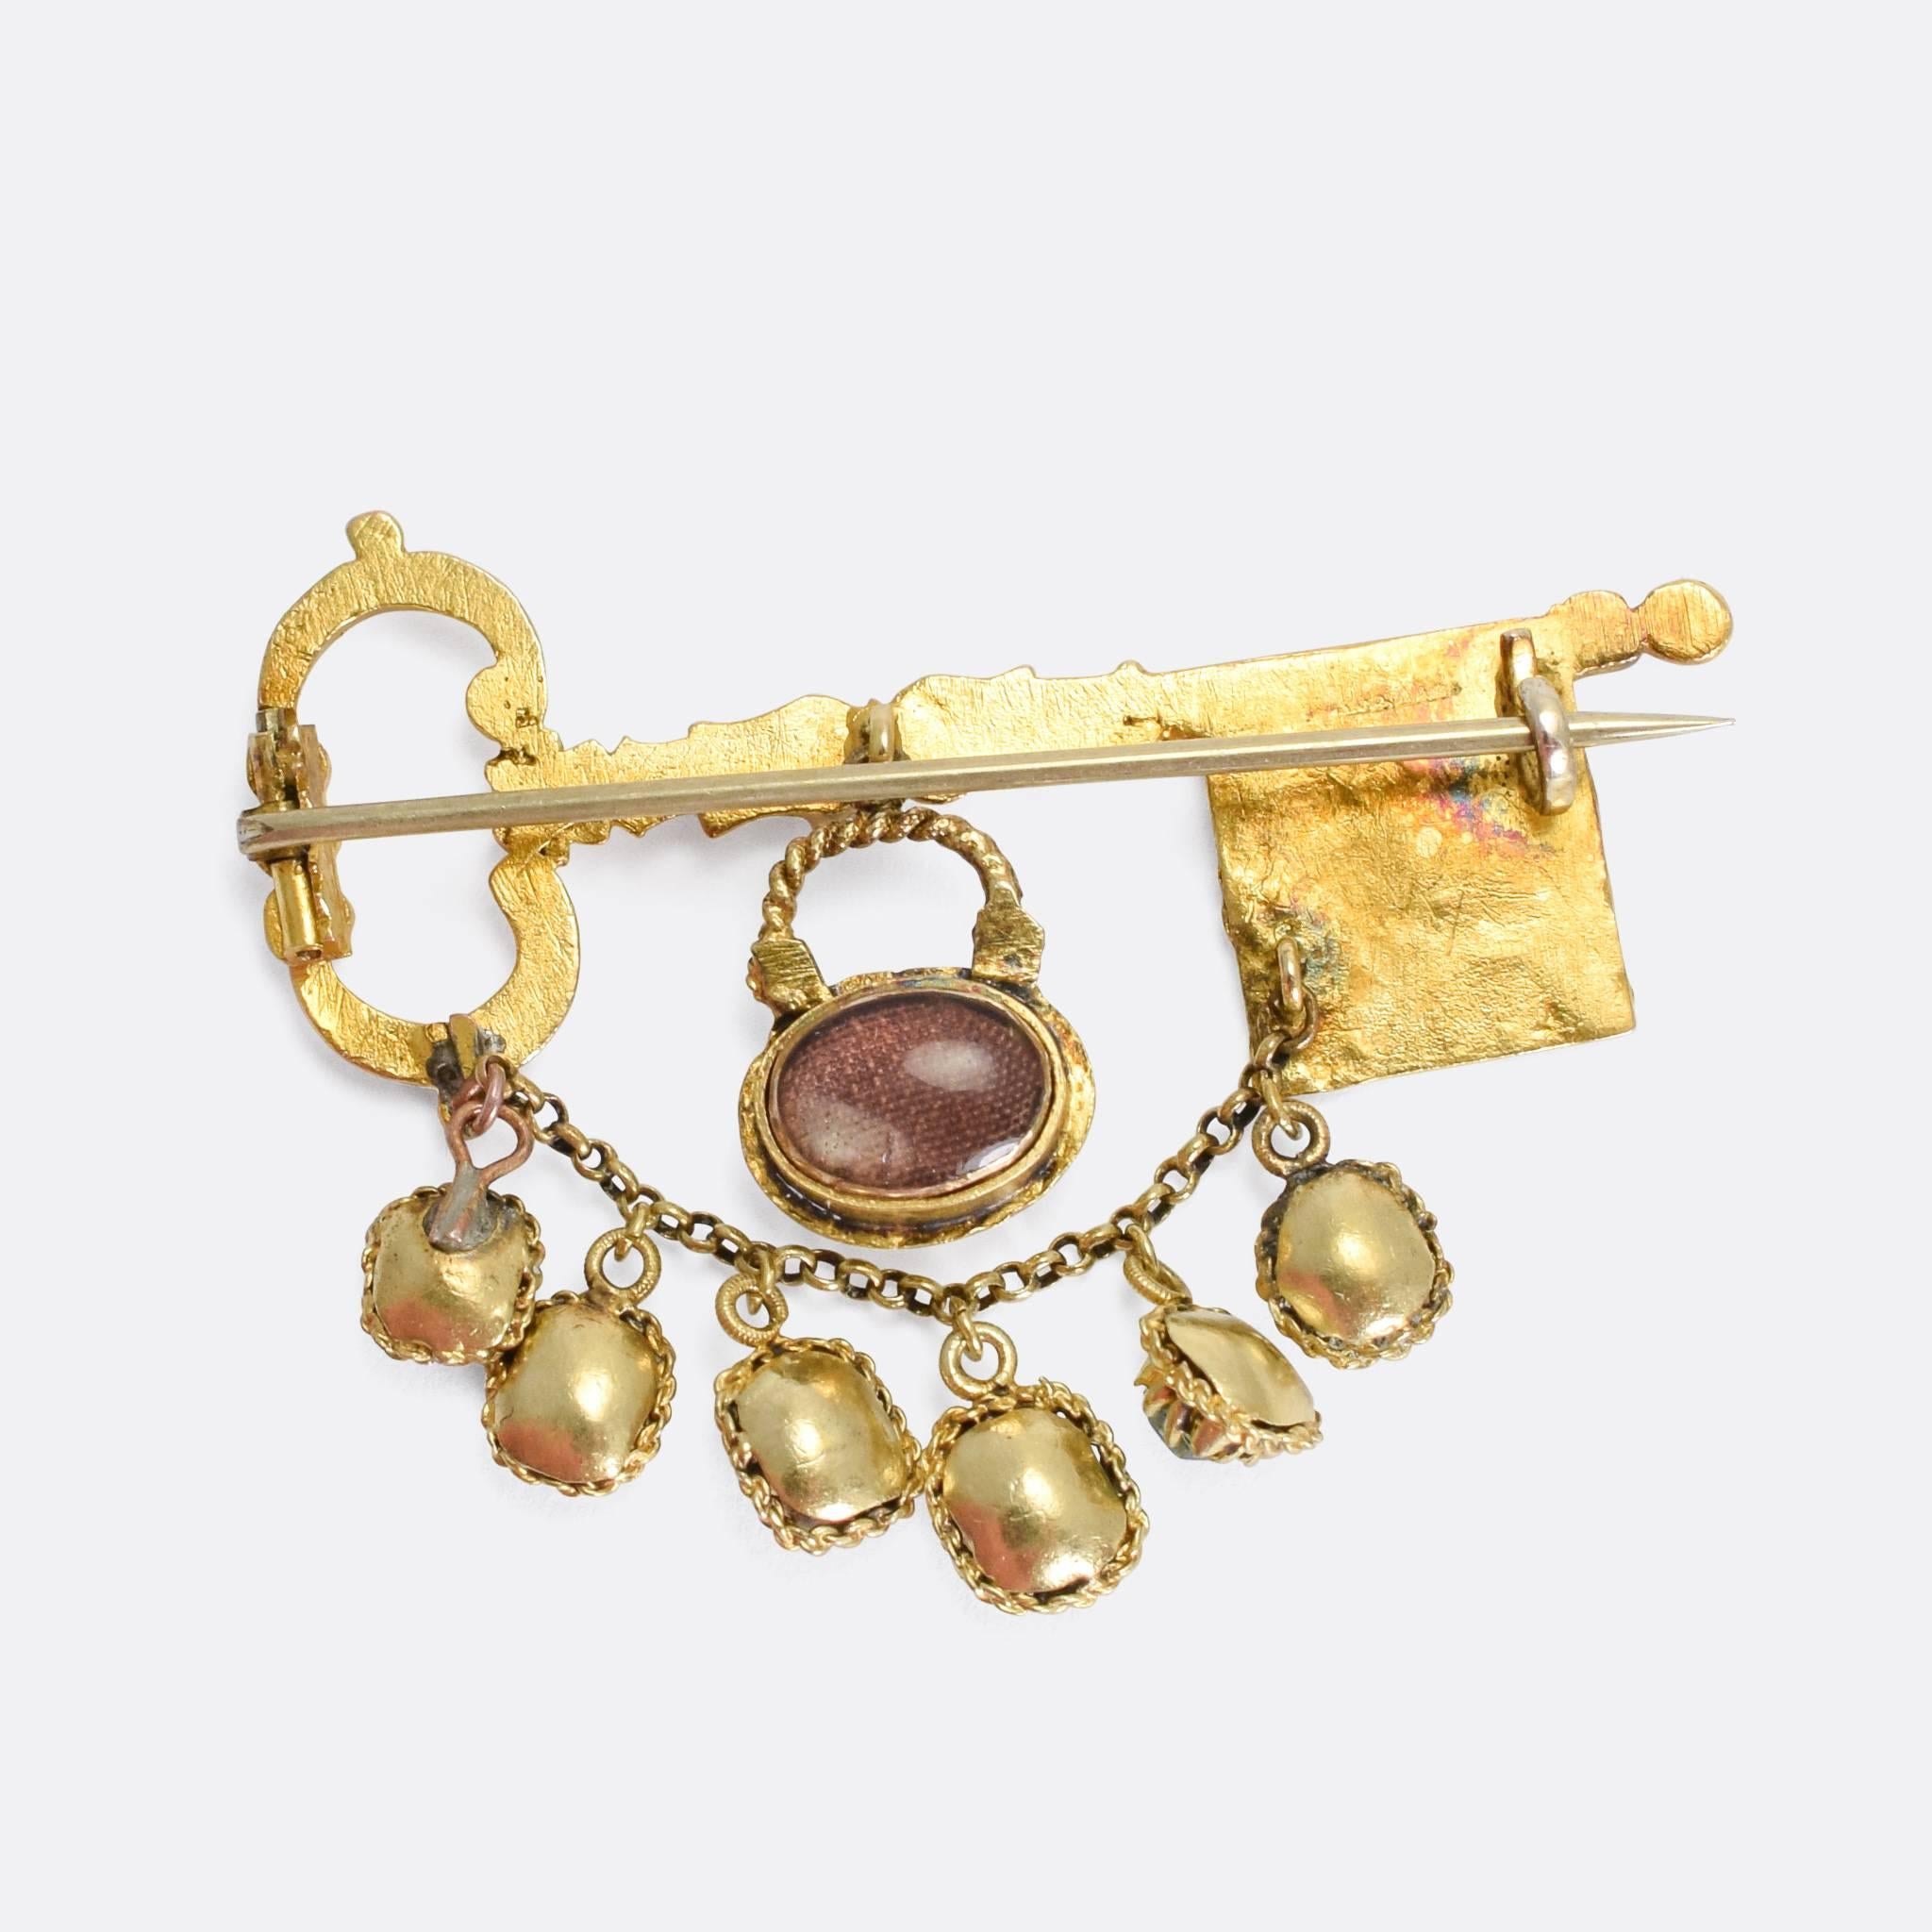 A spectacular, Museum quality, acrostic brooch dating from the early 19th Century. The main body is a beautifully hand-chased gold key, featuring intricate cross-hatched patterns and foliate details. Dangling from the key are two further components: